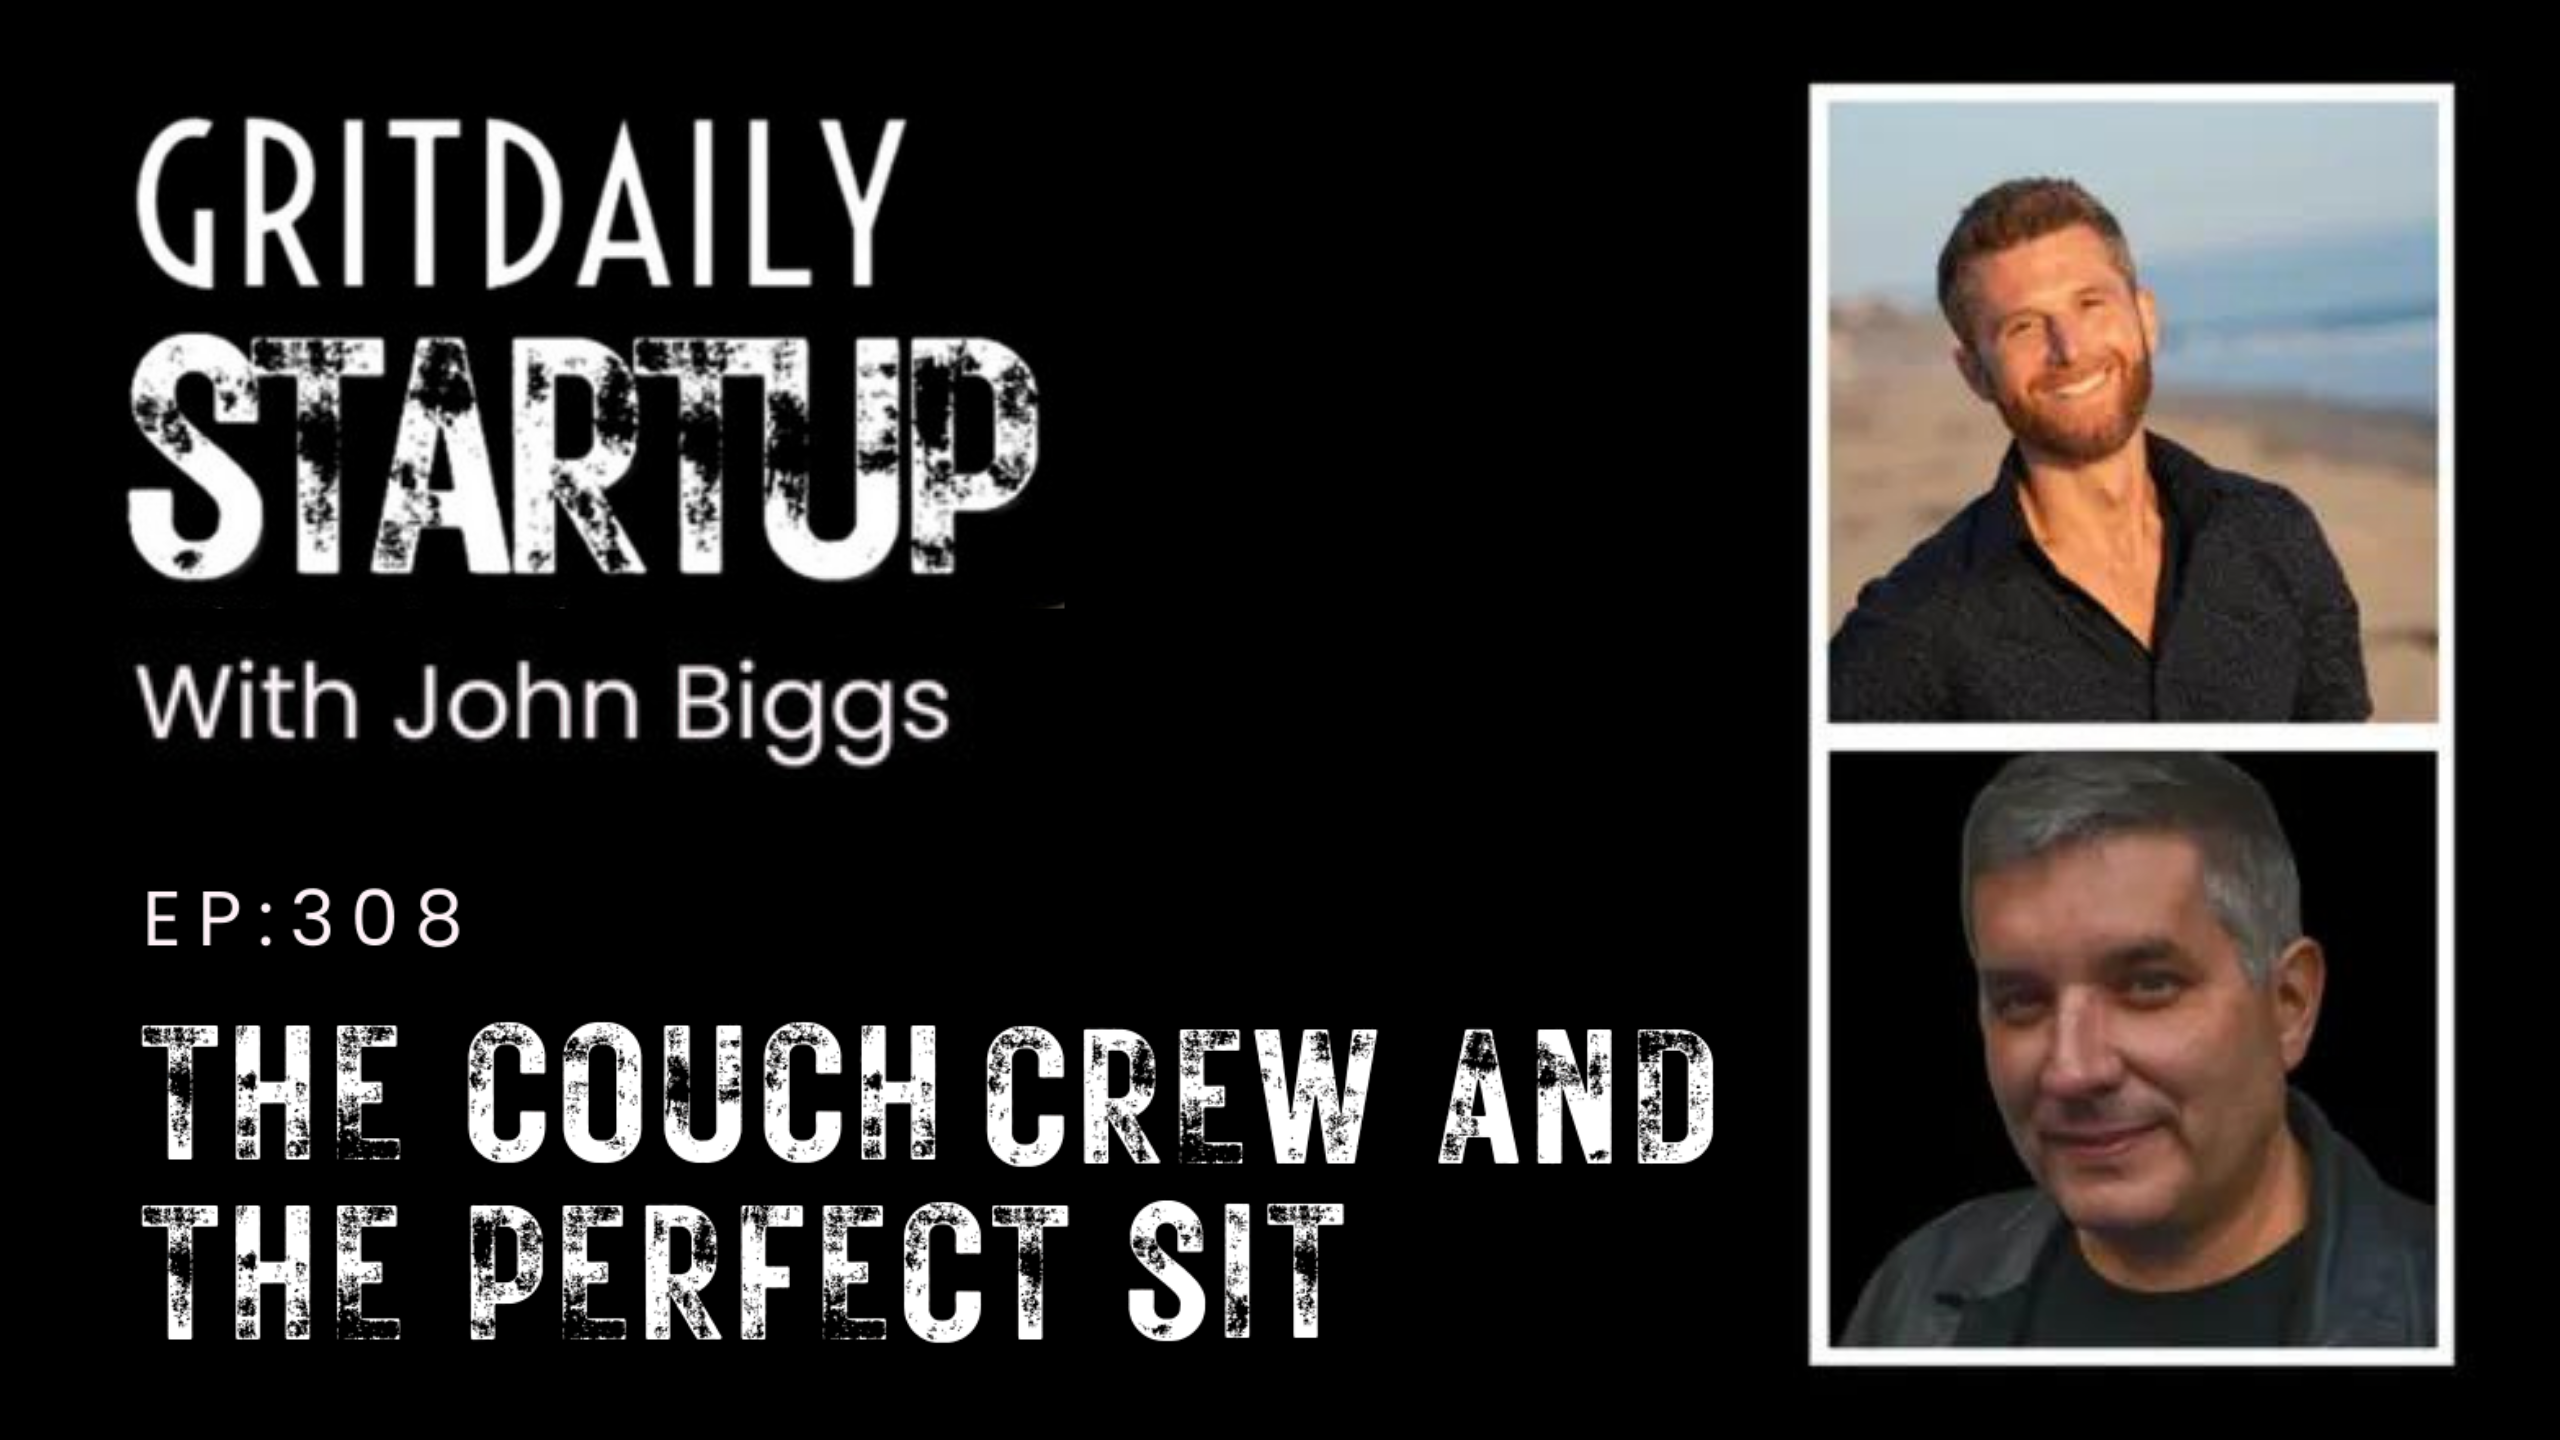 Promo image for the Grit Daily Startup podcast featuring John Biggs. The text reads "EP: 308 The Couch Crew and the Perfect Sit." The image includes headshots of two men: one smiling in front of a beach, and another with gray hair against a dark background.